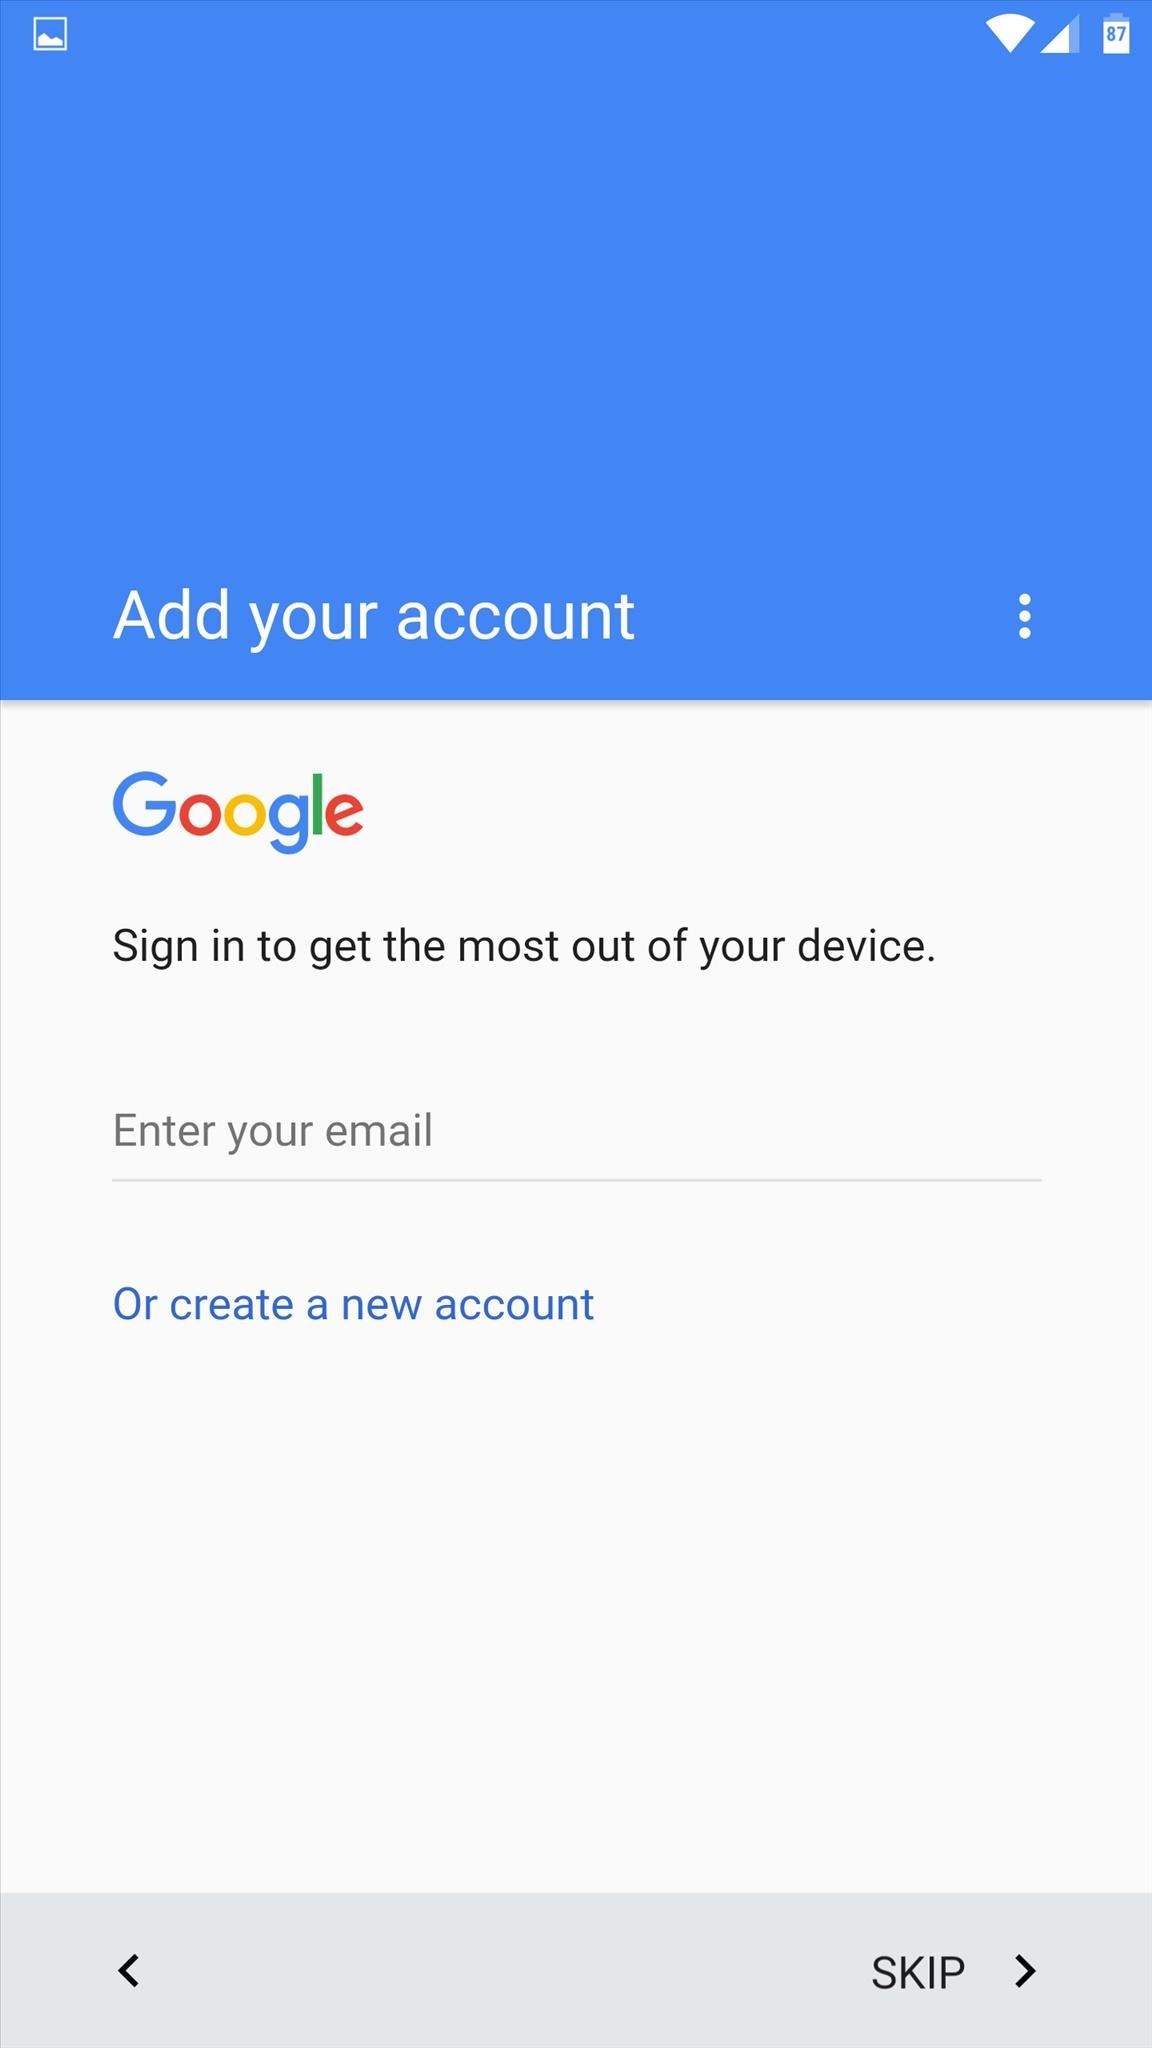 Android Basics: How to Set Up Multiple User Accounts on the Same Device